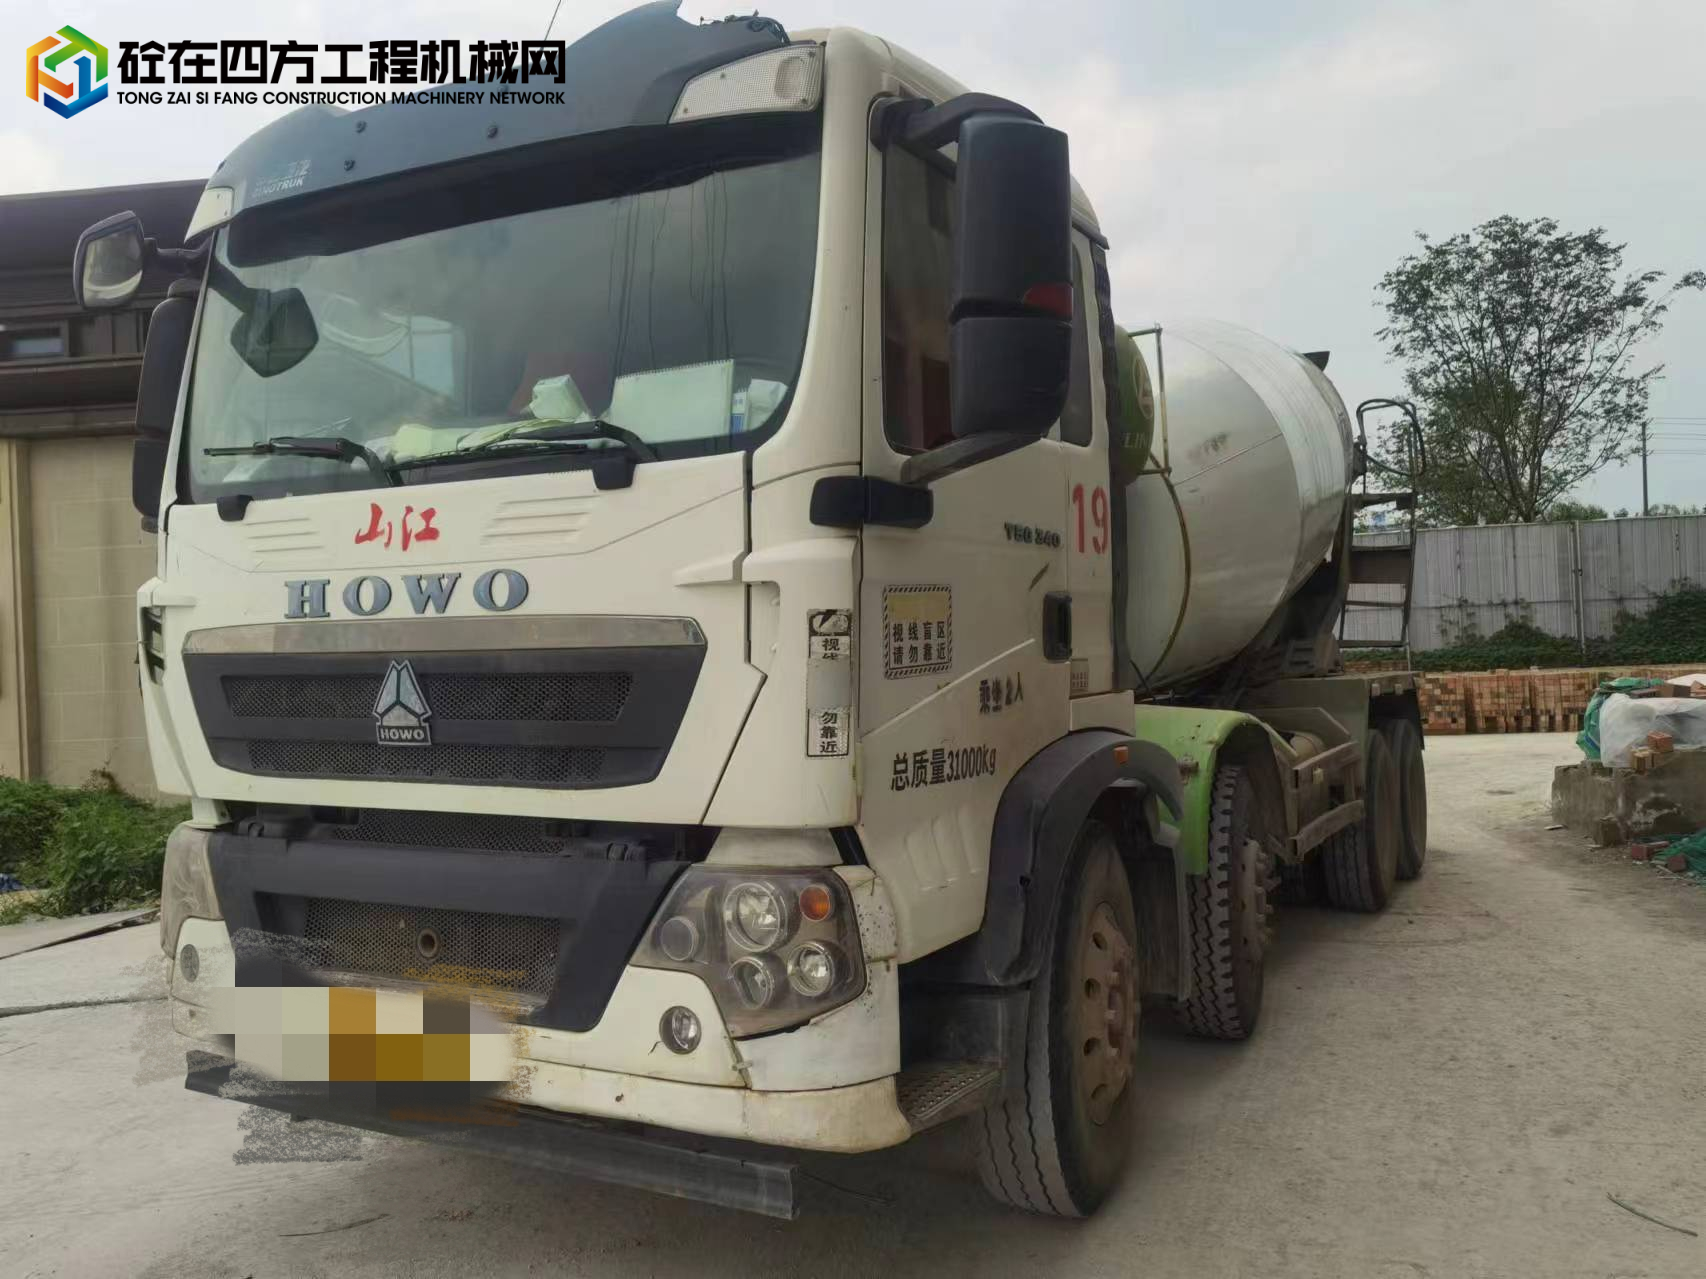 https://images.tongzsf.com/tong/truck_machine/20240607/1666264af2ee51.jpg